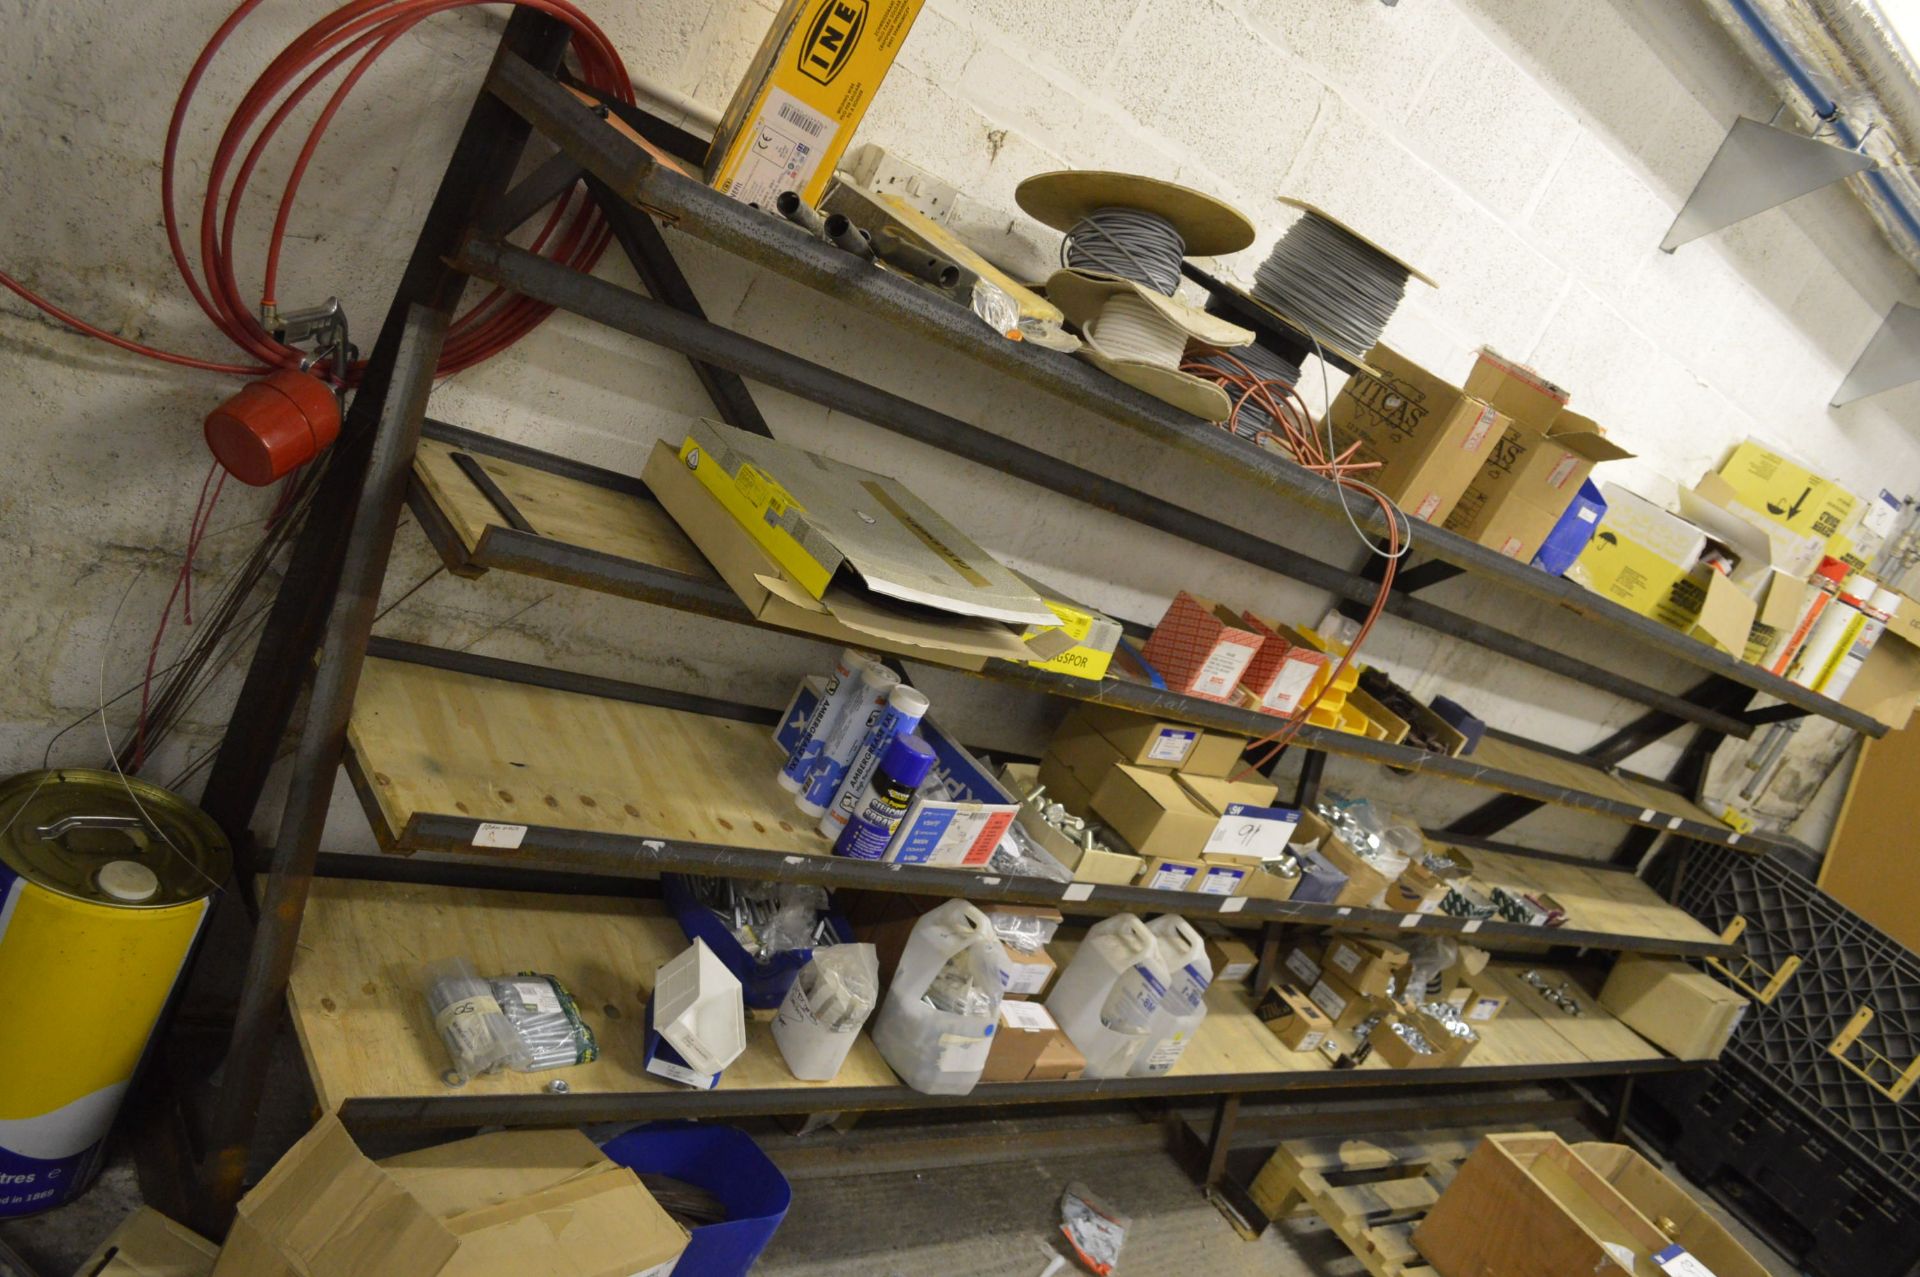 Remaining Loose Contents of Rack, including mainly nuts, bolts, fixings, cable, grinding discs and